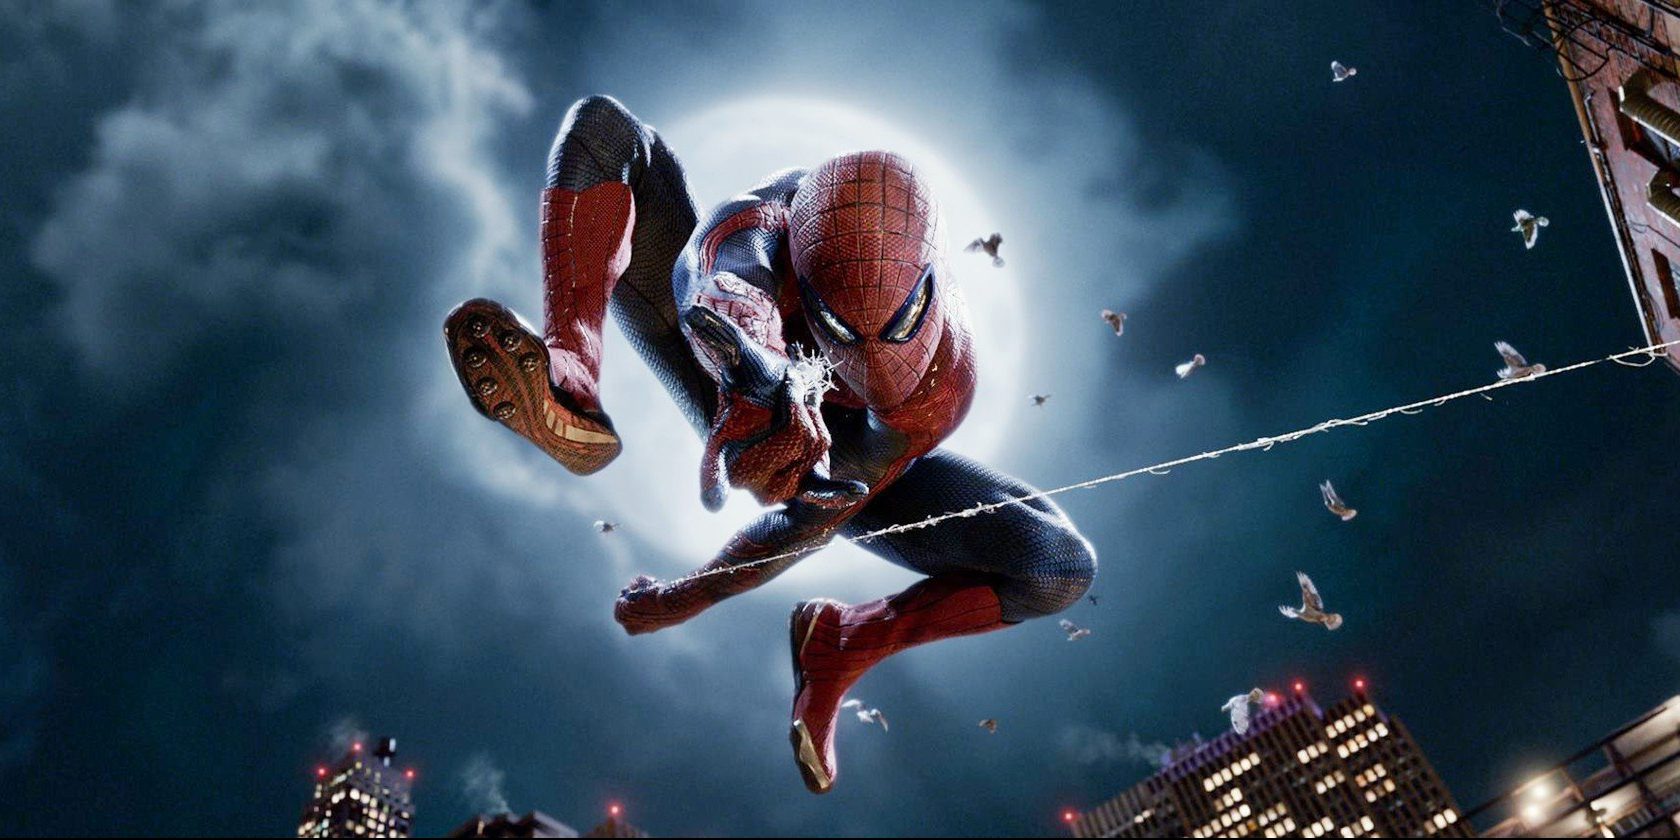 Download The Amazing Spider-Man (2012) Full Movie Free 480p, 720p and 1080p in Dual Audio {Hindi-English}.